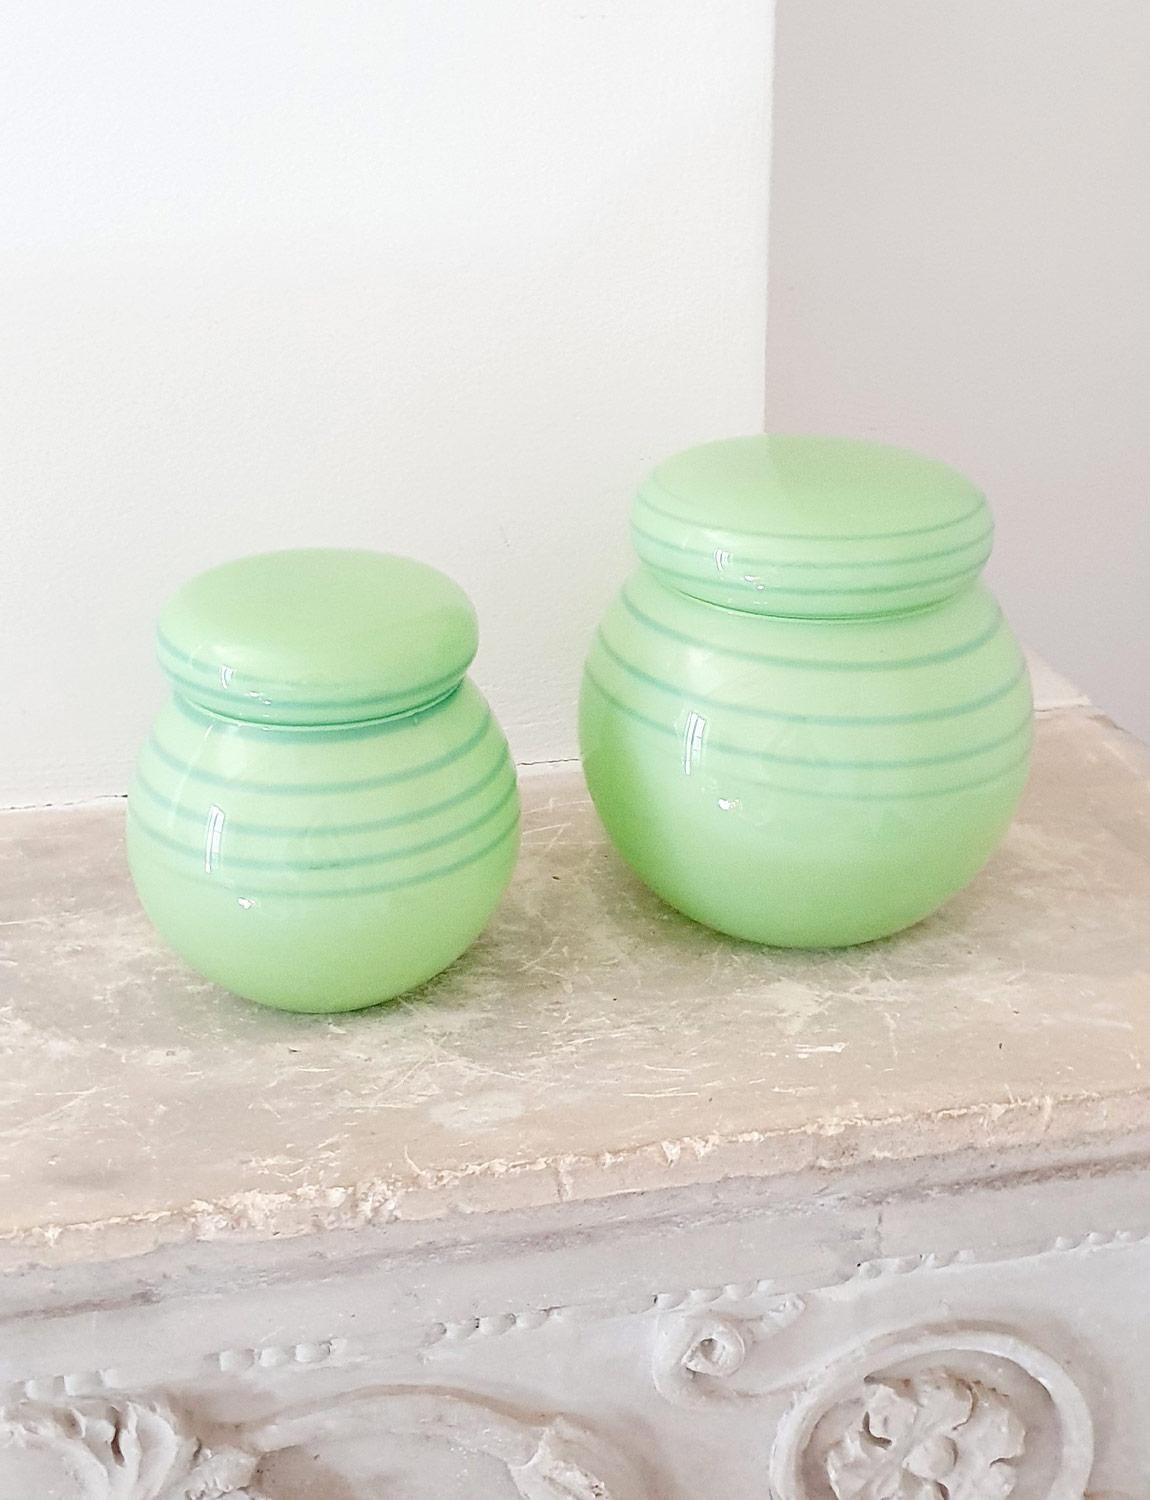 Made in the 1950s in opaque green glass, these Italian round shaped hand-blown pots both with their own lids, have a pale blue spiral pattern that encircles their lid and the upper part of their base. I found these wonderful pieces in Florence, they